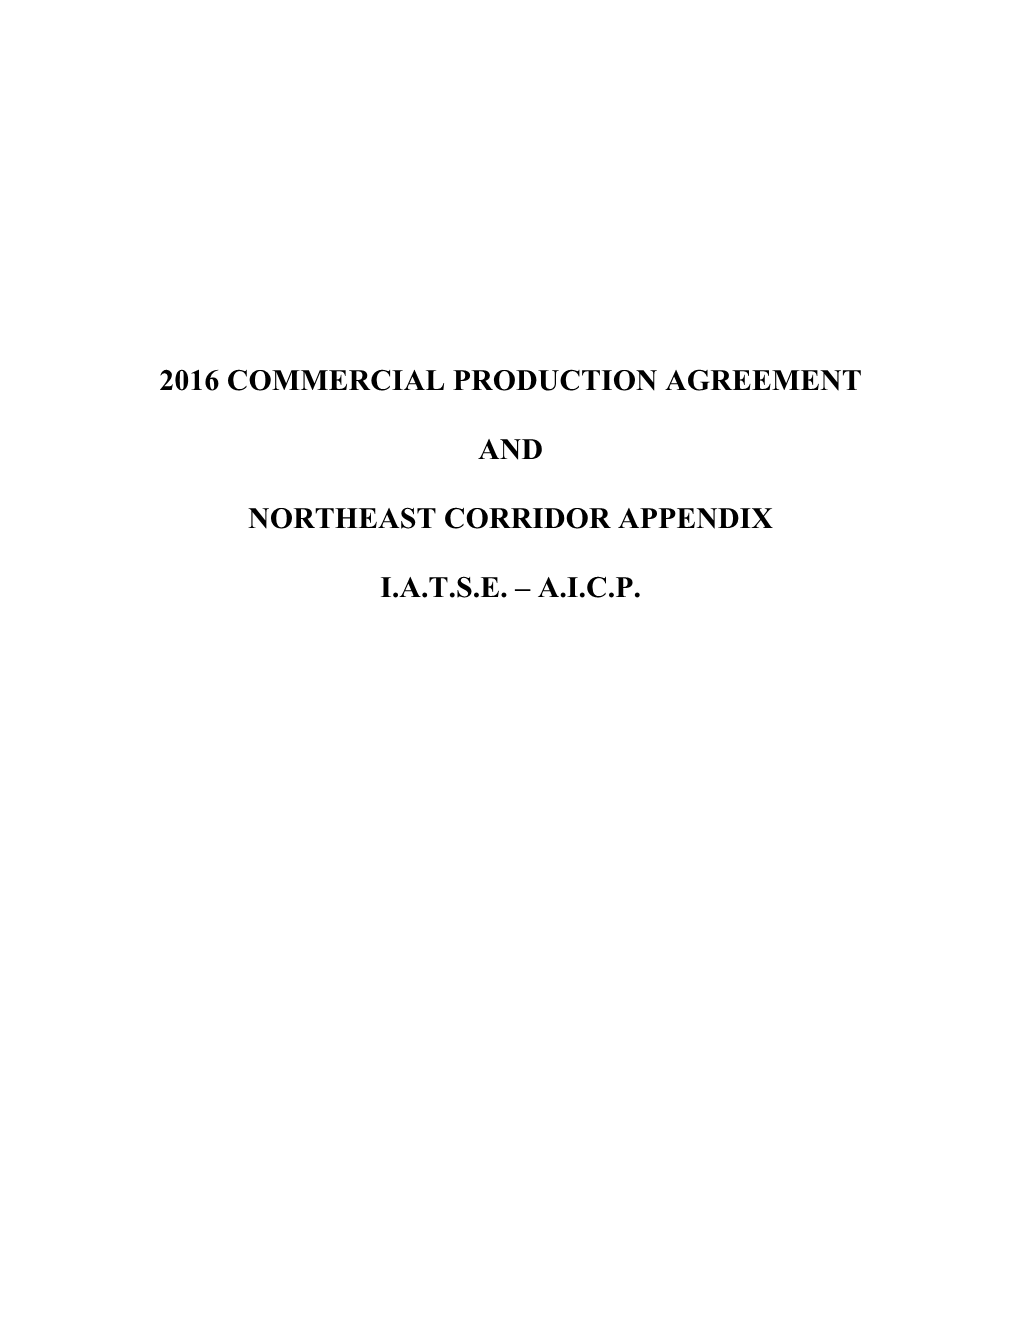 2016 Commercial Production Agreement